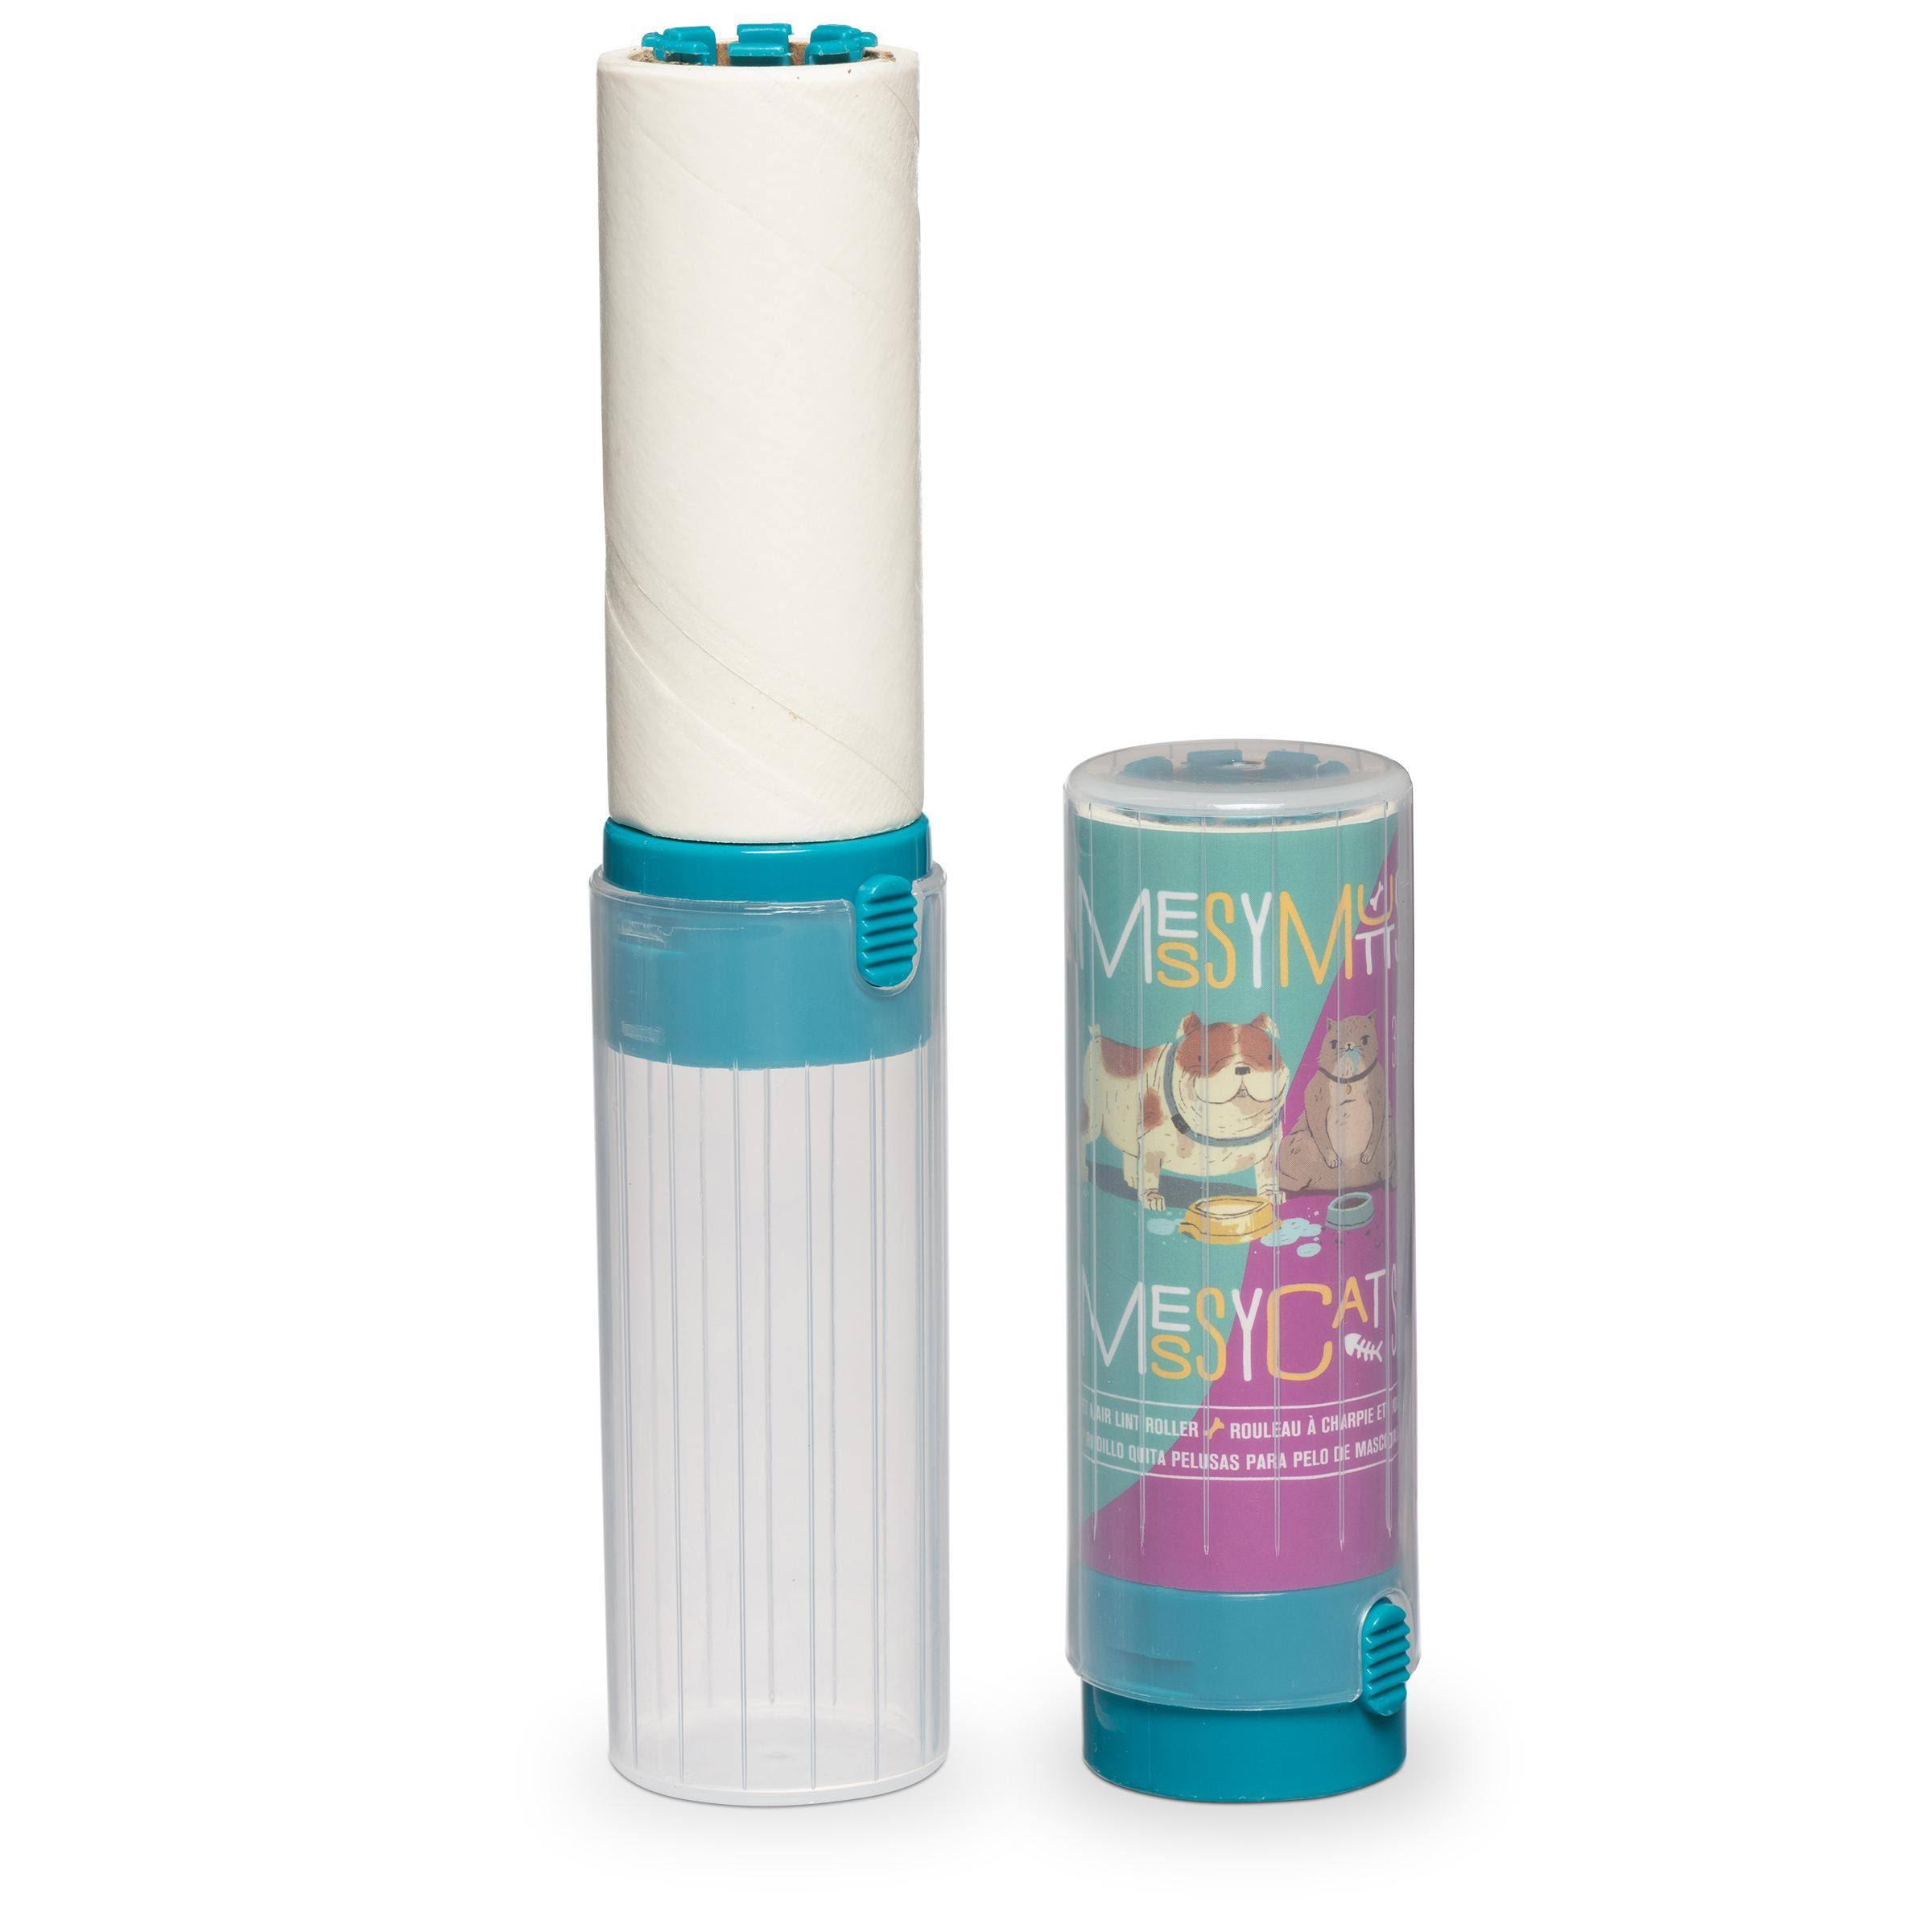 Messy Mutts Pet Hair Lint Roller, 6.8-in